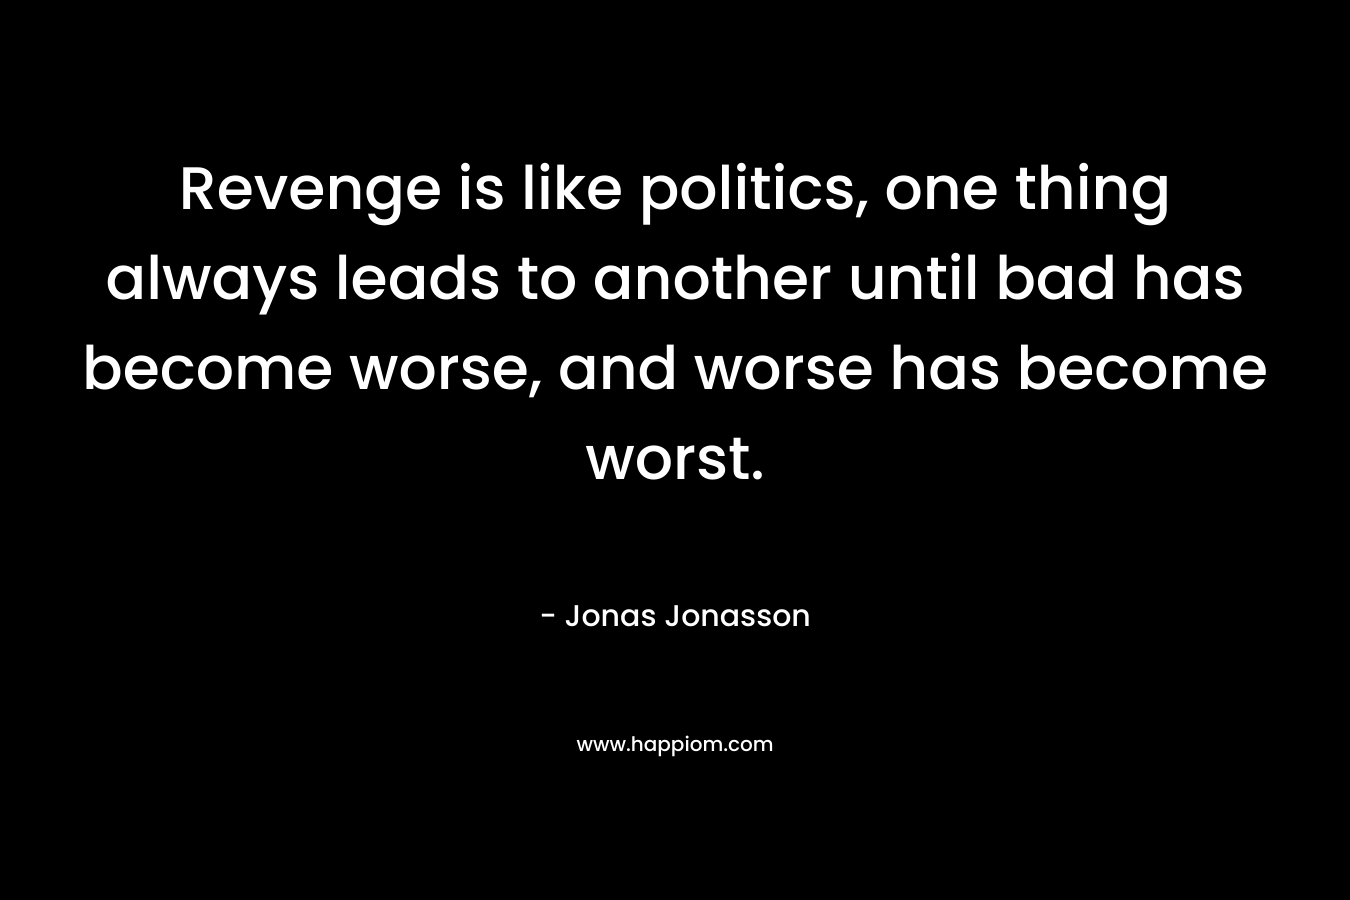 Revenge is like politics, one thing always leads to another until bad has become worse, and worse has become worst. – Jonas Jonasson